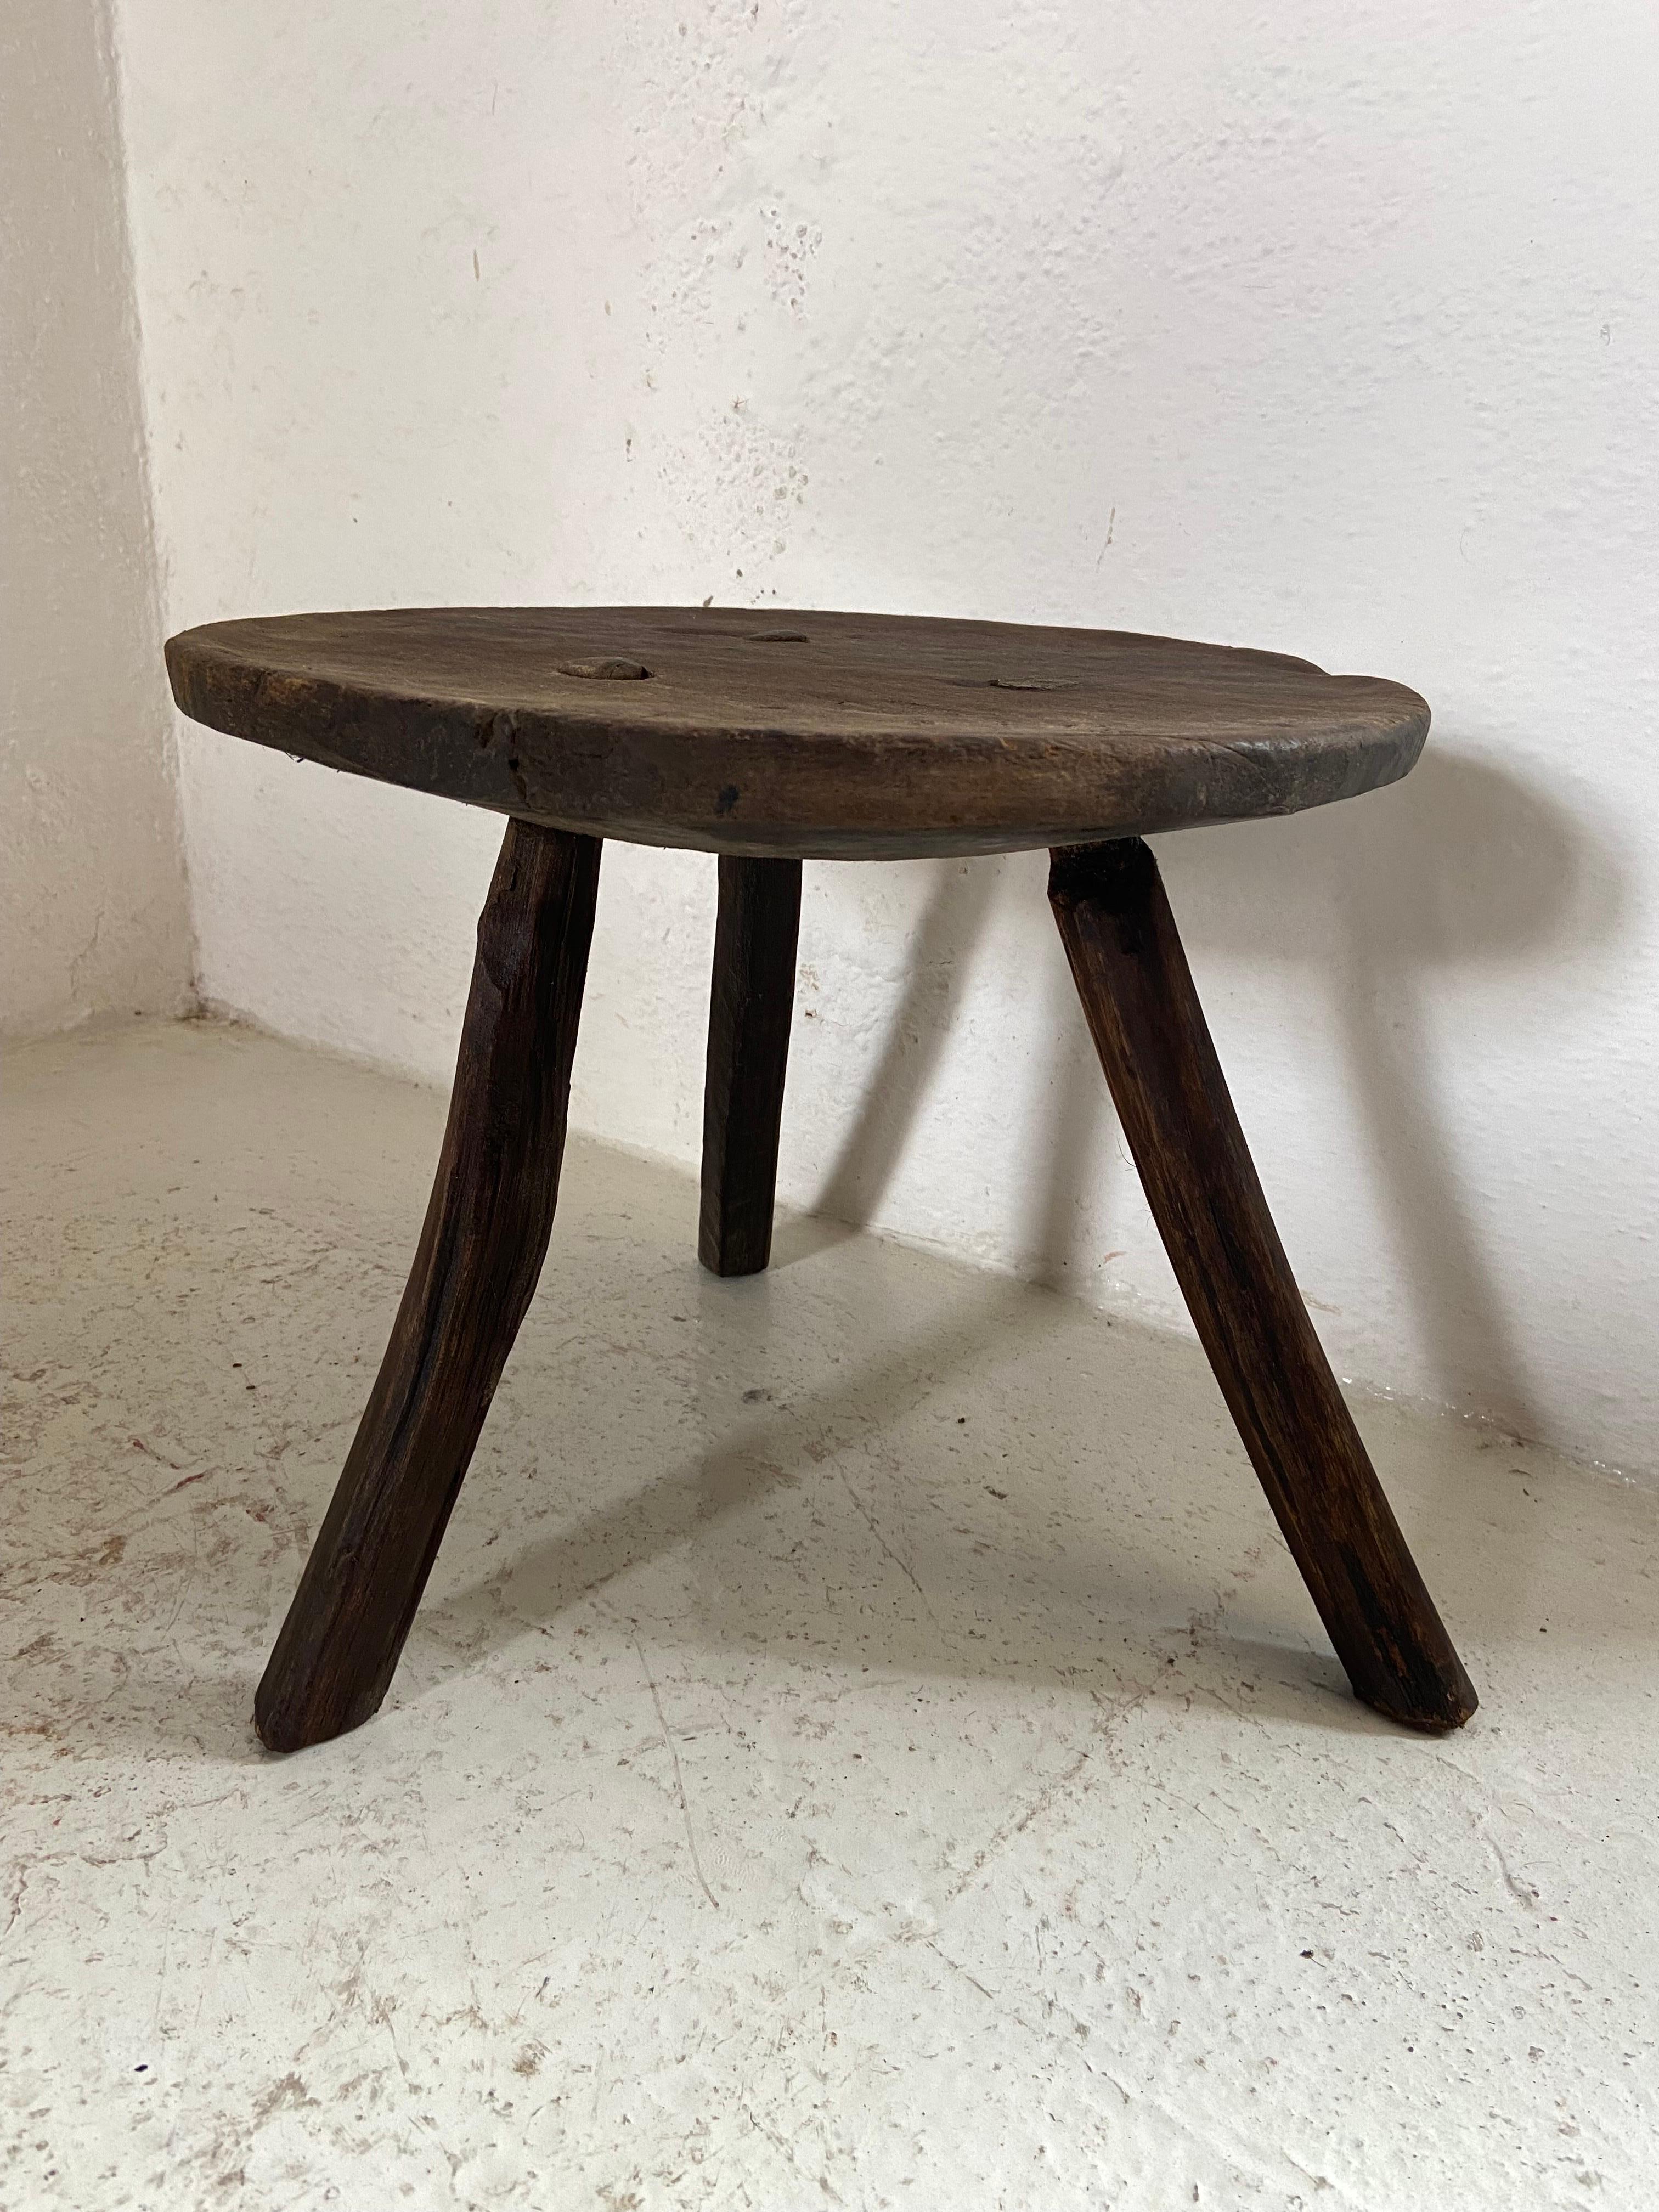 Country Mid-20th Century Hardwood Stool from Mexico